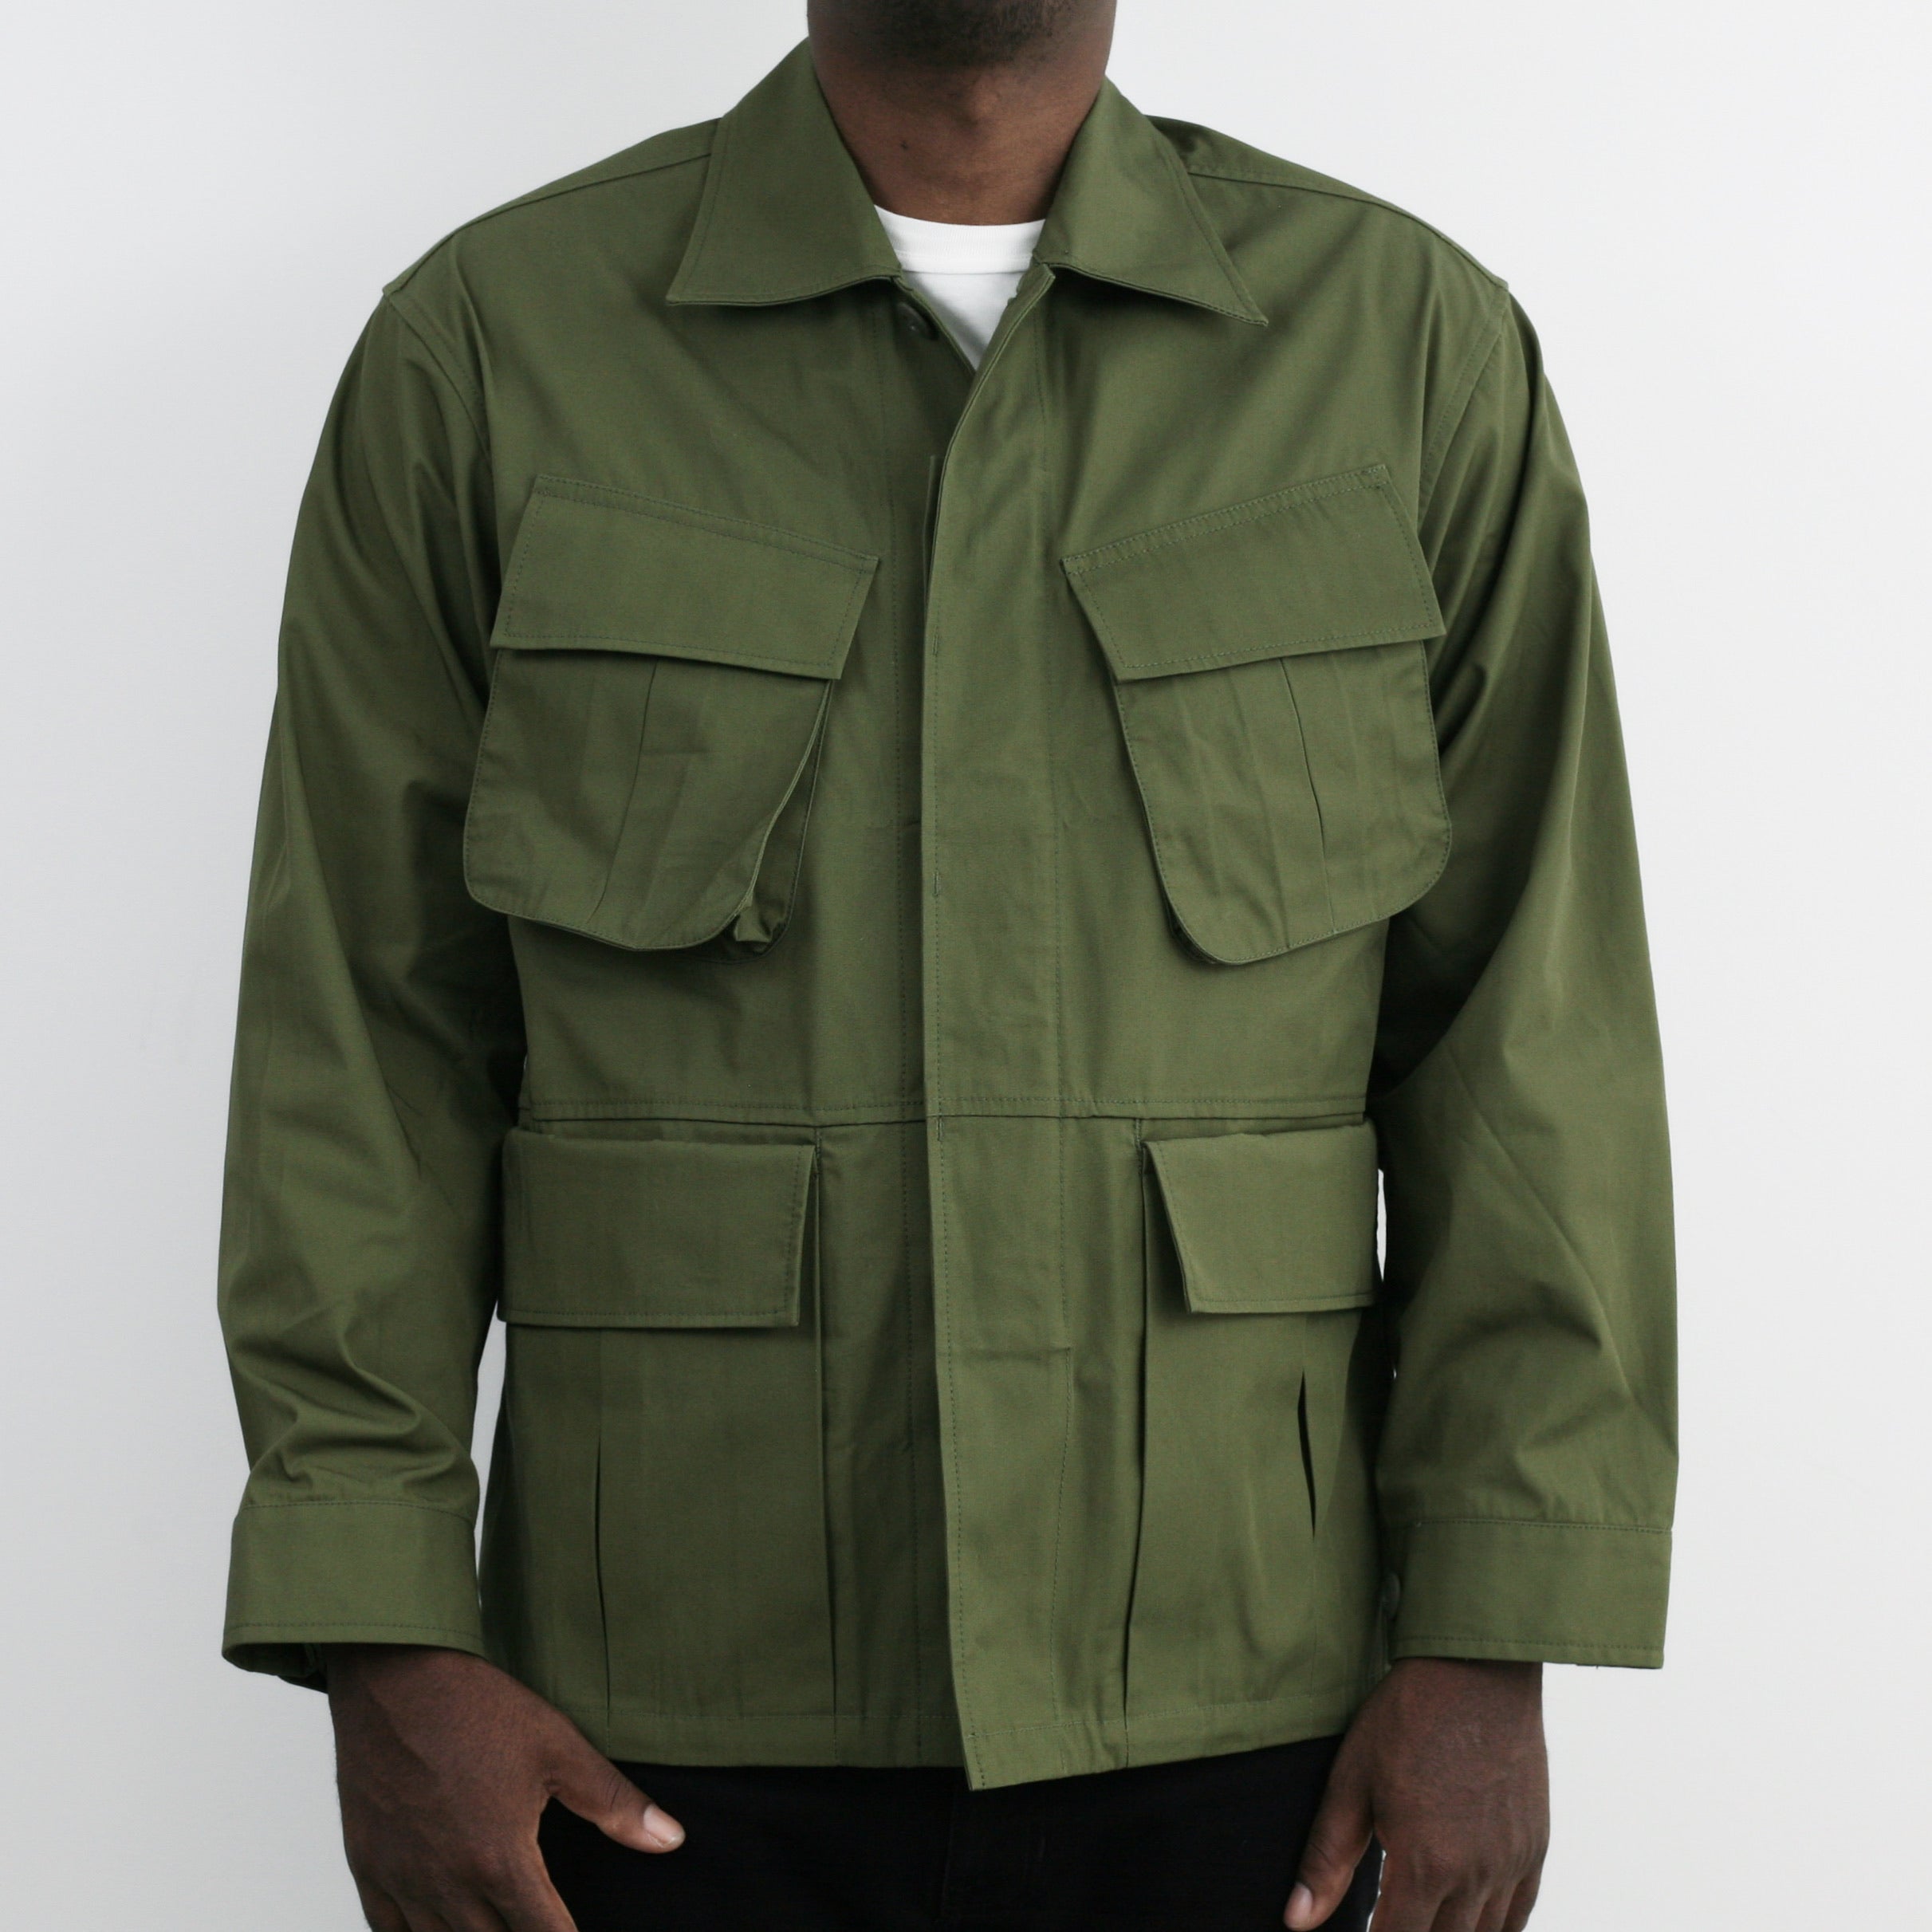 "Over Jacket" in Olive High Density Cotton Drill